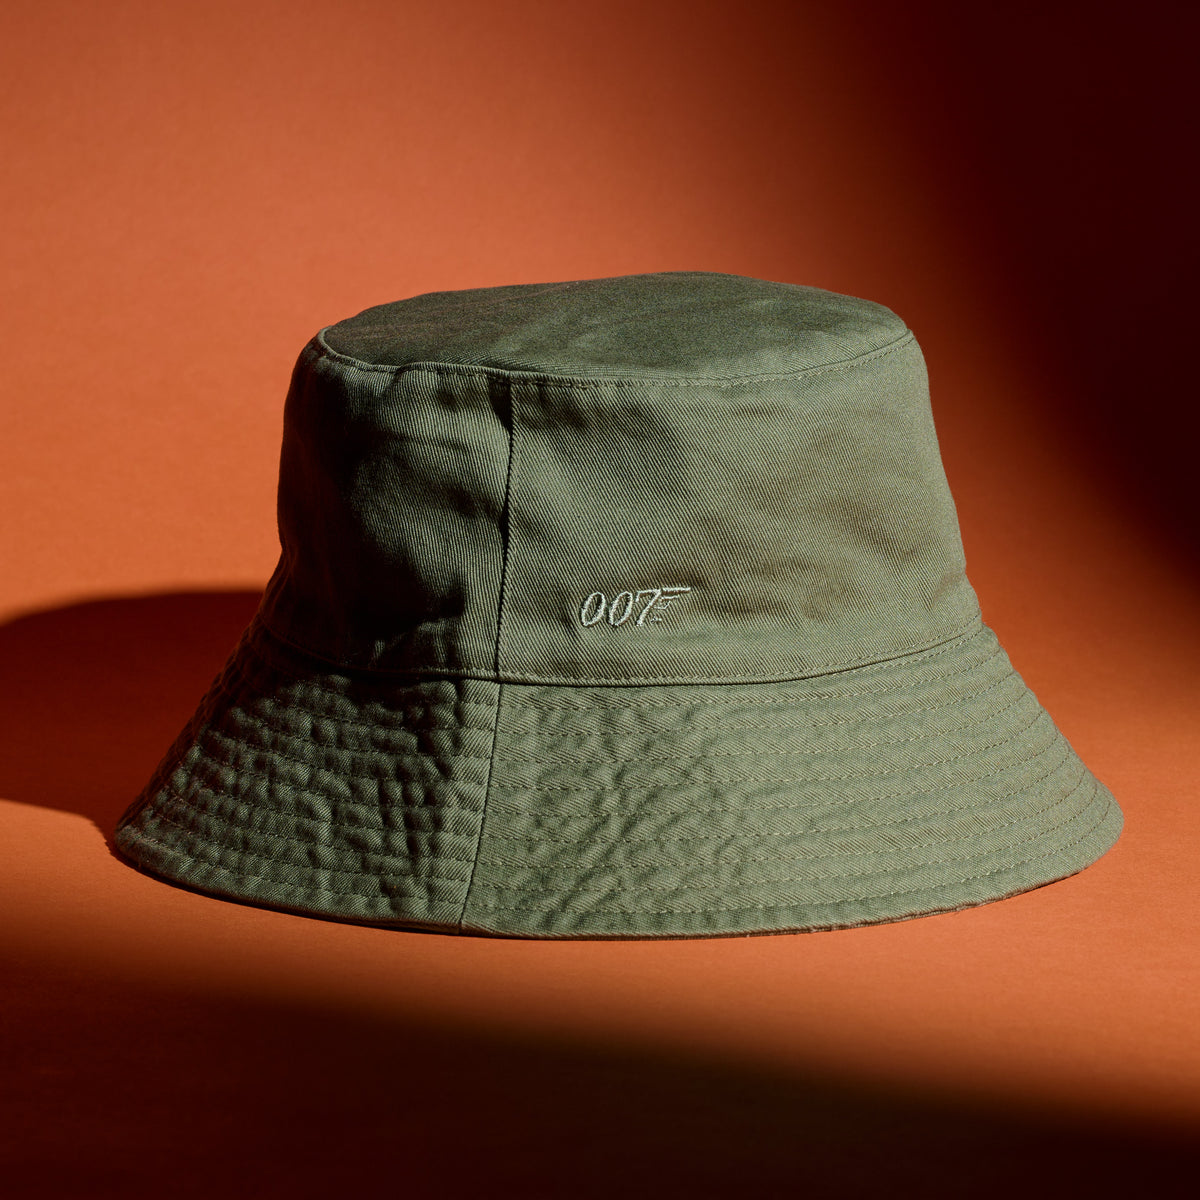 James Bond 007 Embroidered Cotton Twill Bucket Hat - Olive Edition